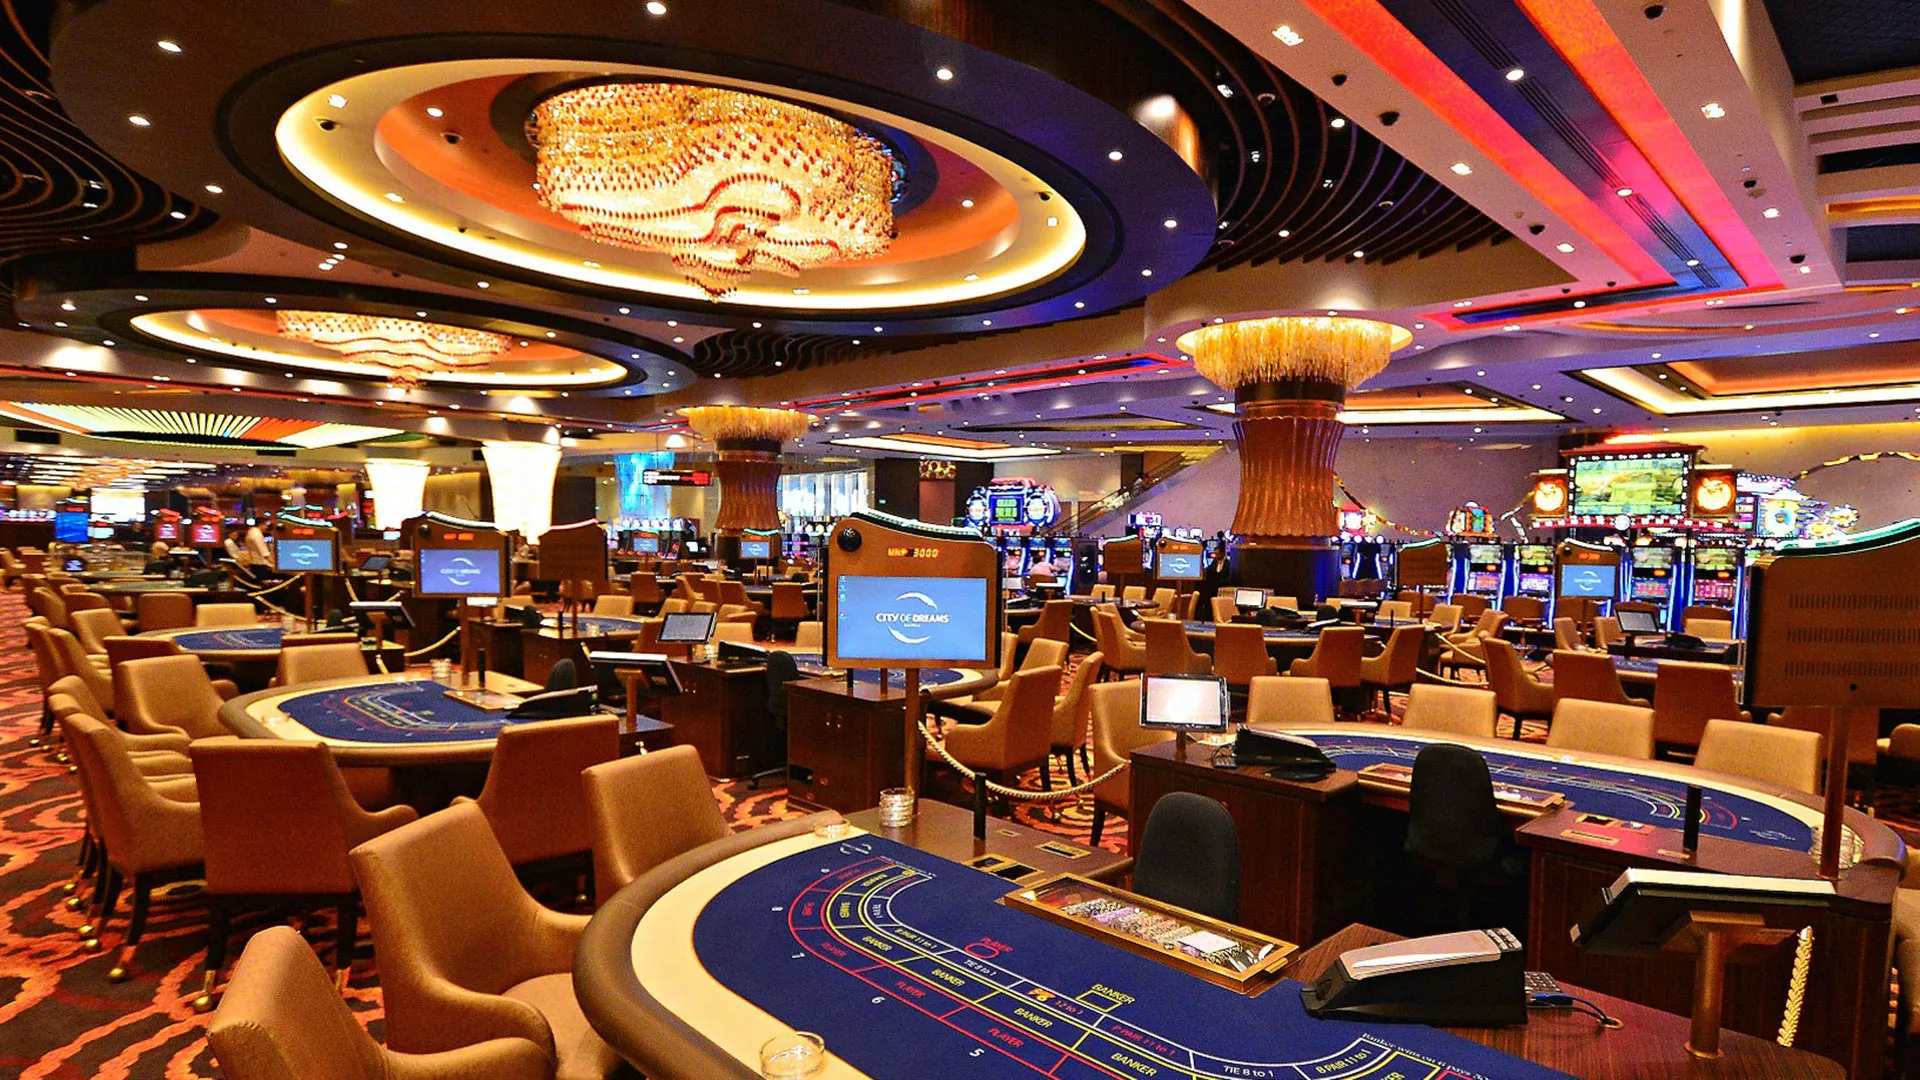 Top 3 Gambling Destinations From Around the Globe